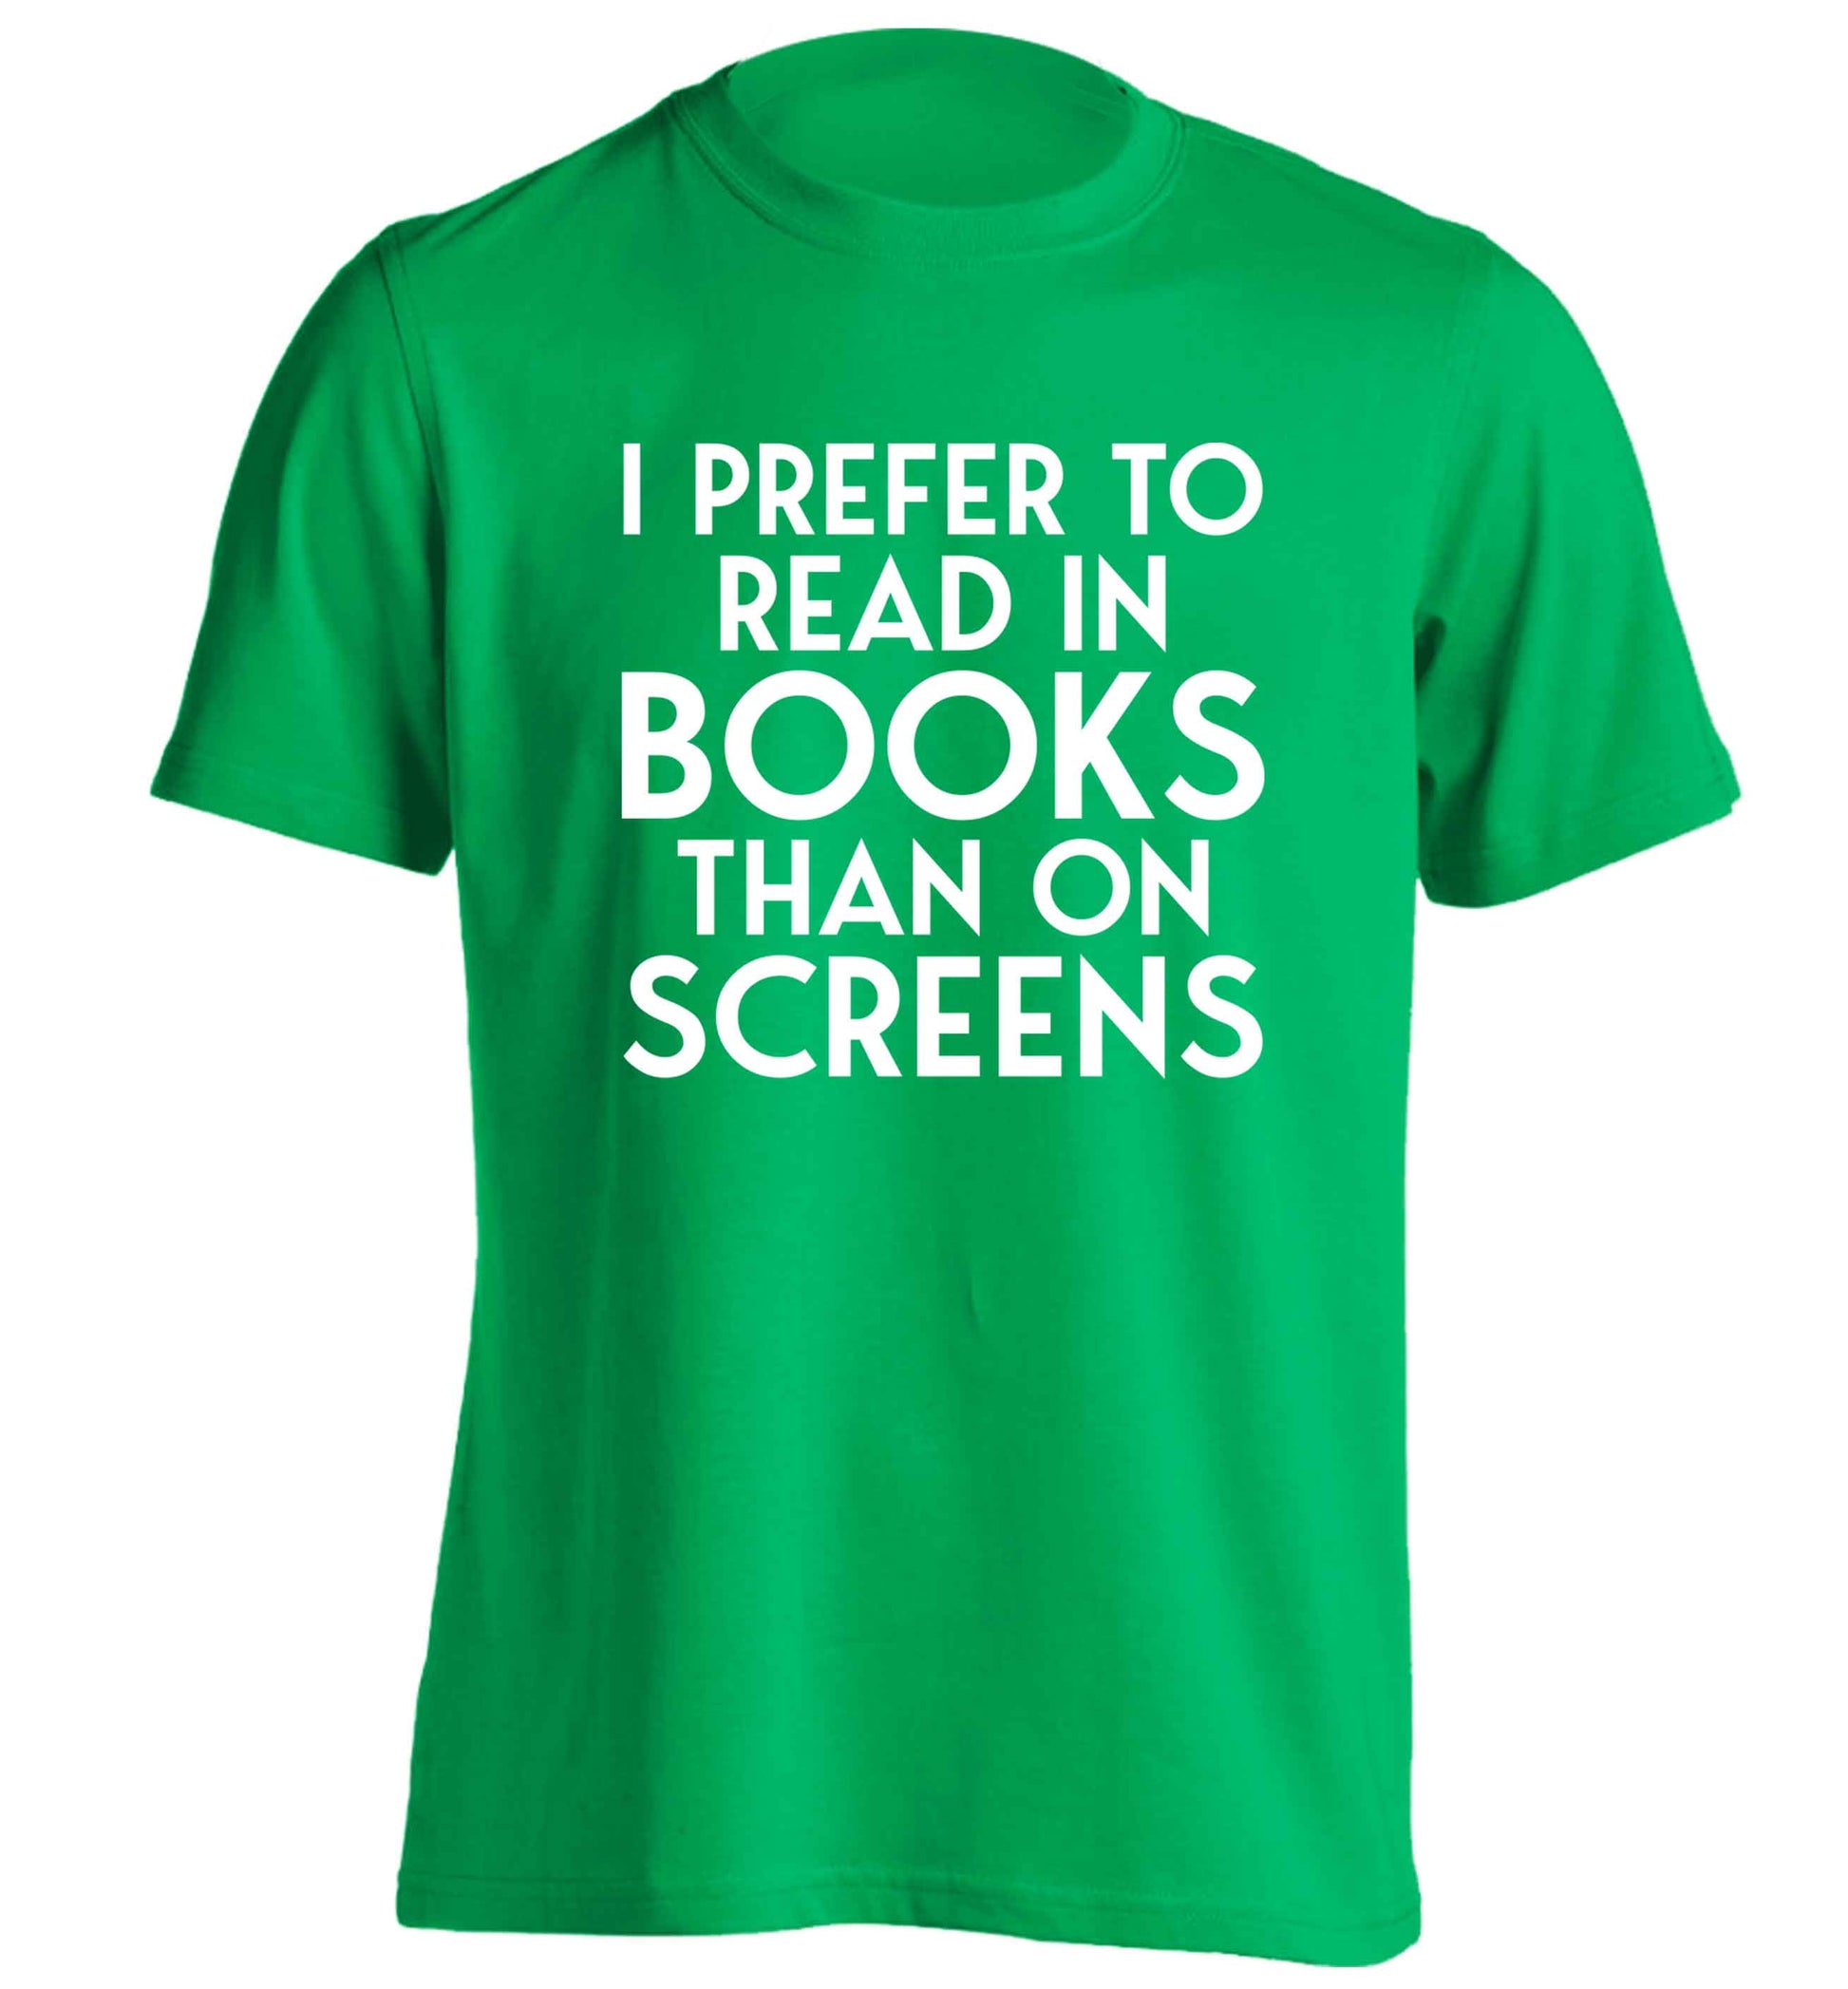 I prefer to read in books than on screens adults unisex green Tshirt 2XL